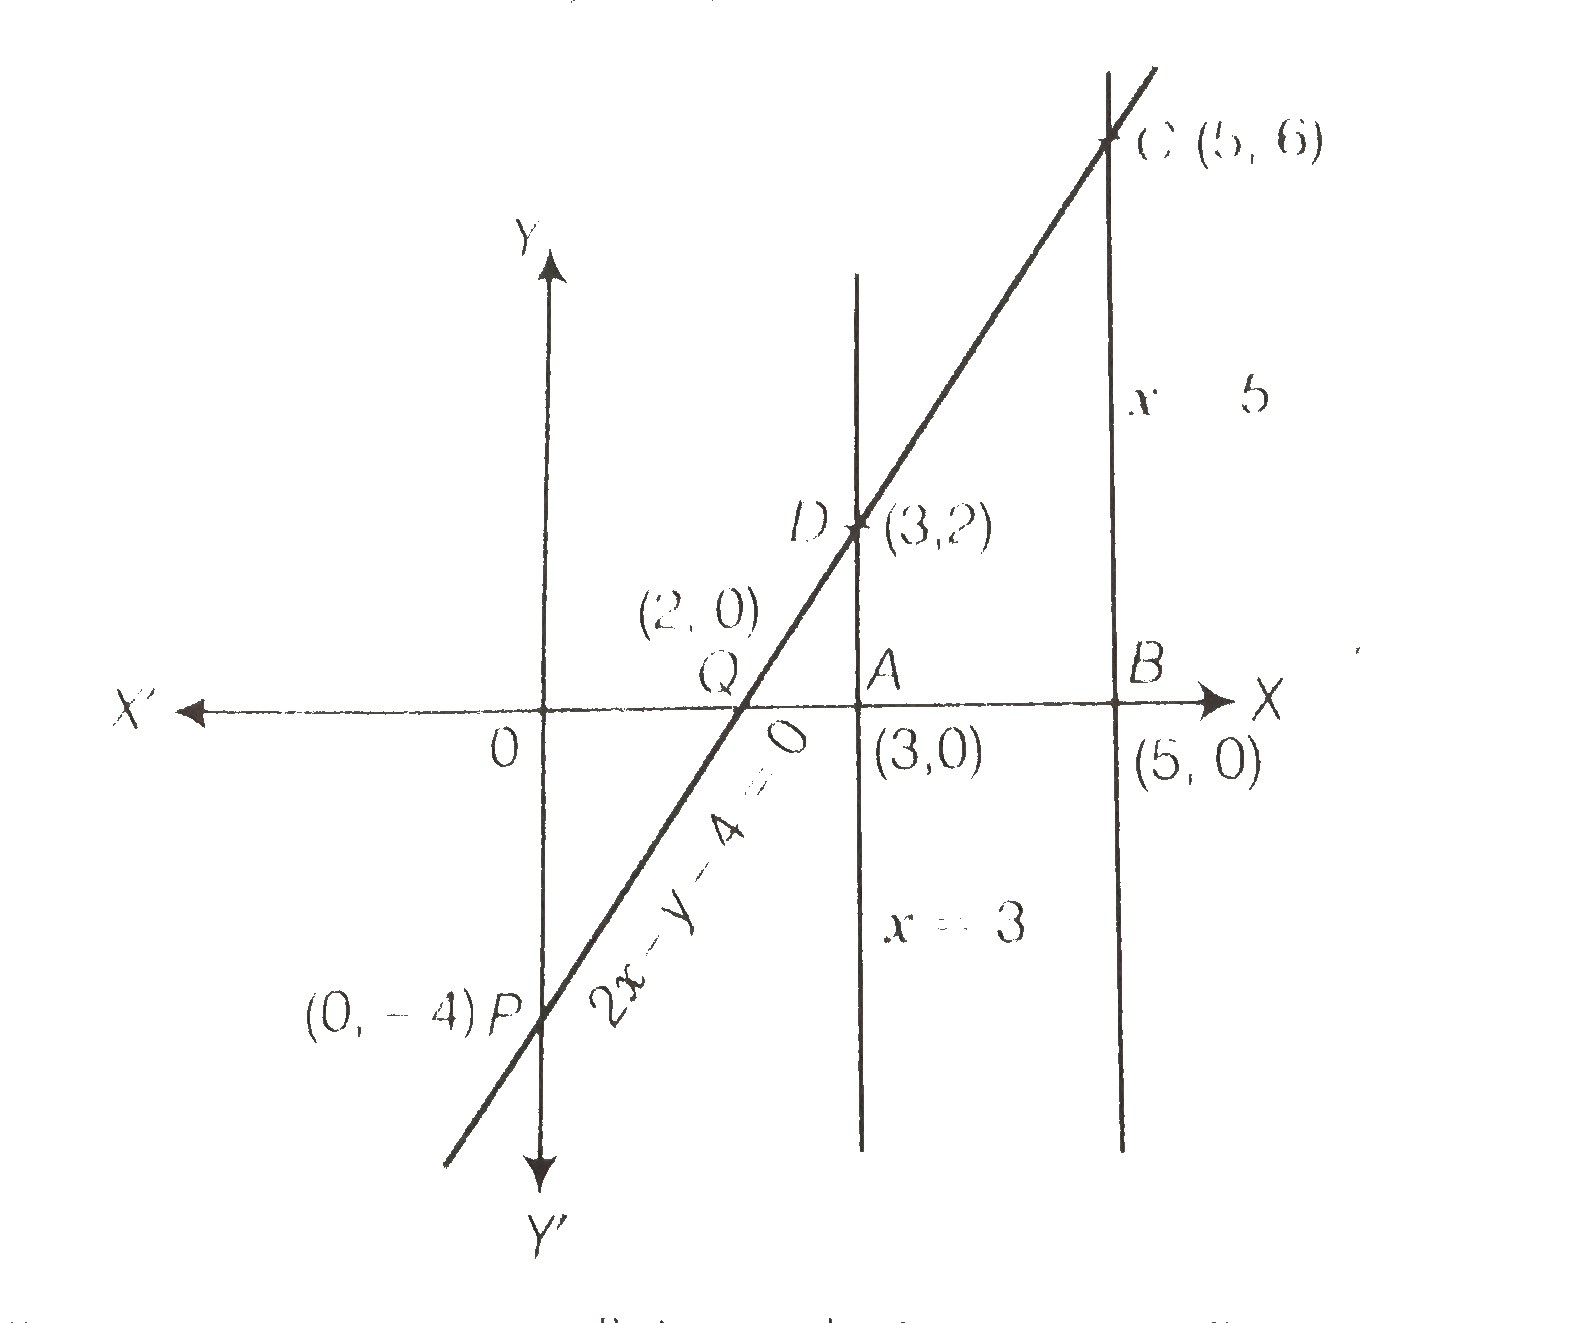 Draw The Graphs Of The Equations X 3 X 5 And 2x Y 4 0 Also Find The Area Of The Quadrilateral Formed By The Lines And The X Axis